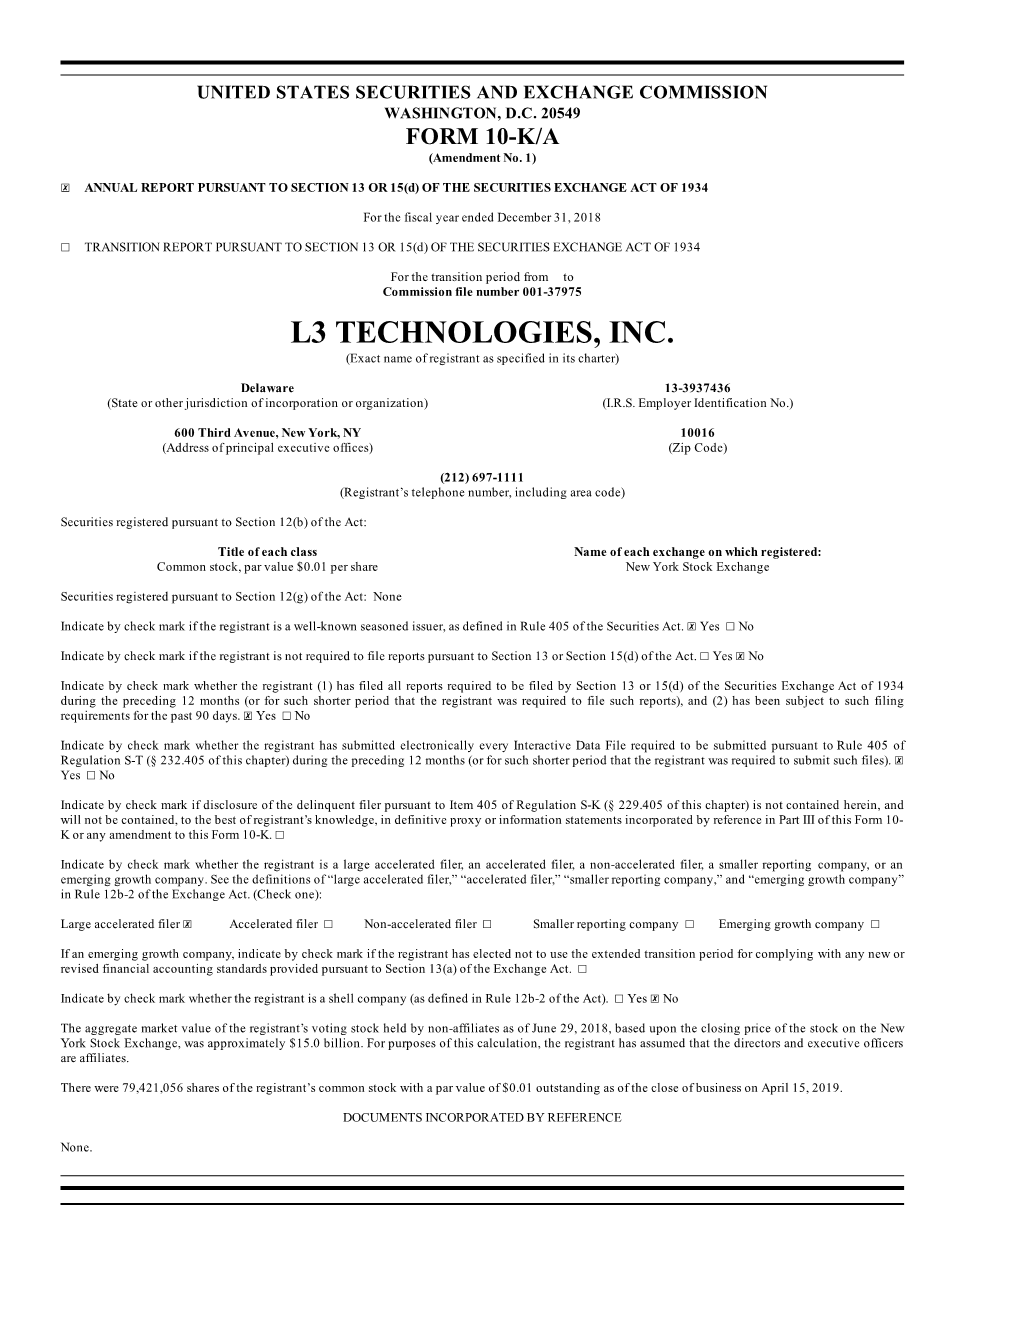 L3 TECHNOLOGIES, INC. (Exact Name of Registrant As Specified in Its Charter)